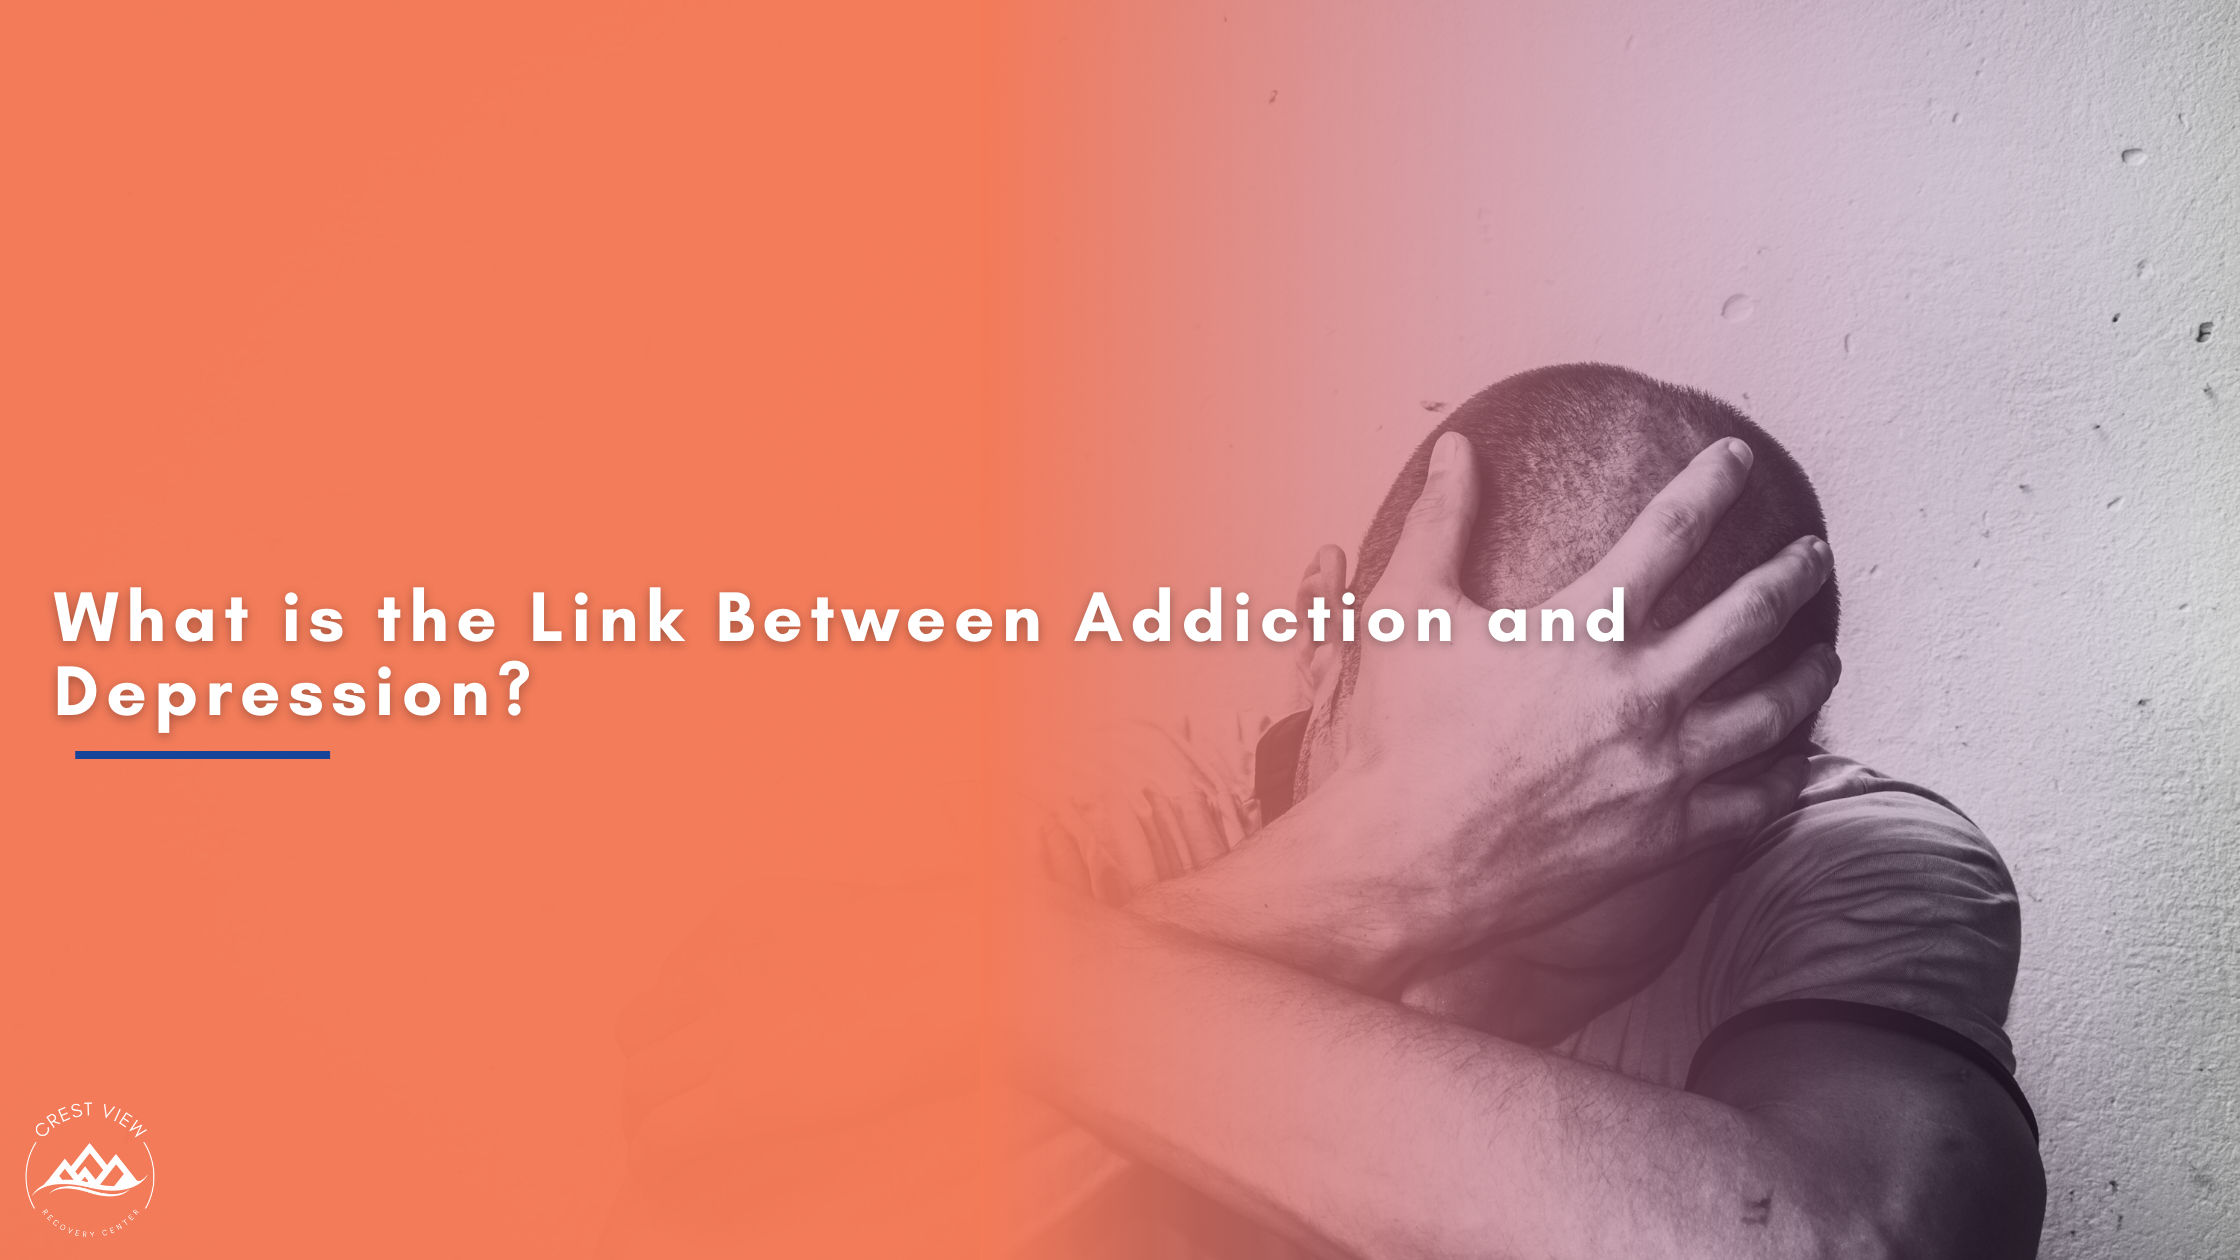 The Link Between Addiction and Depression